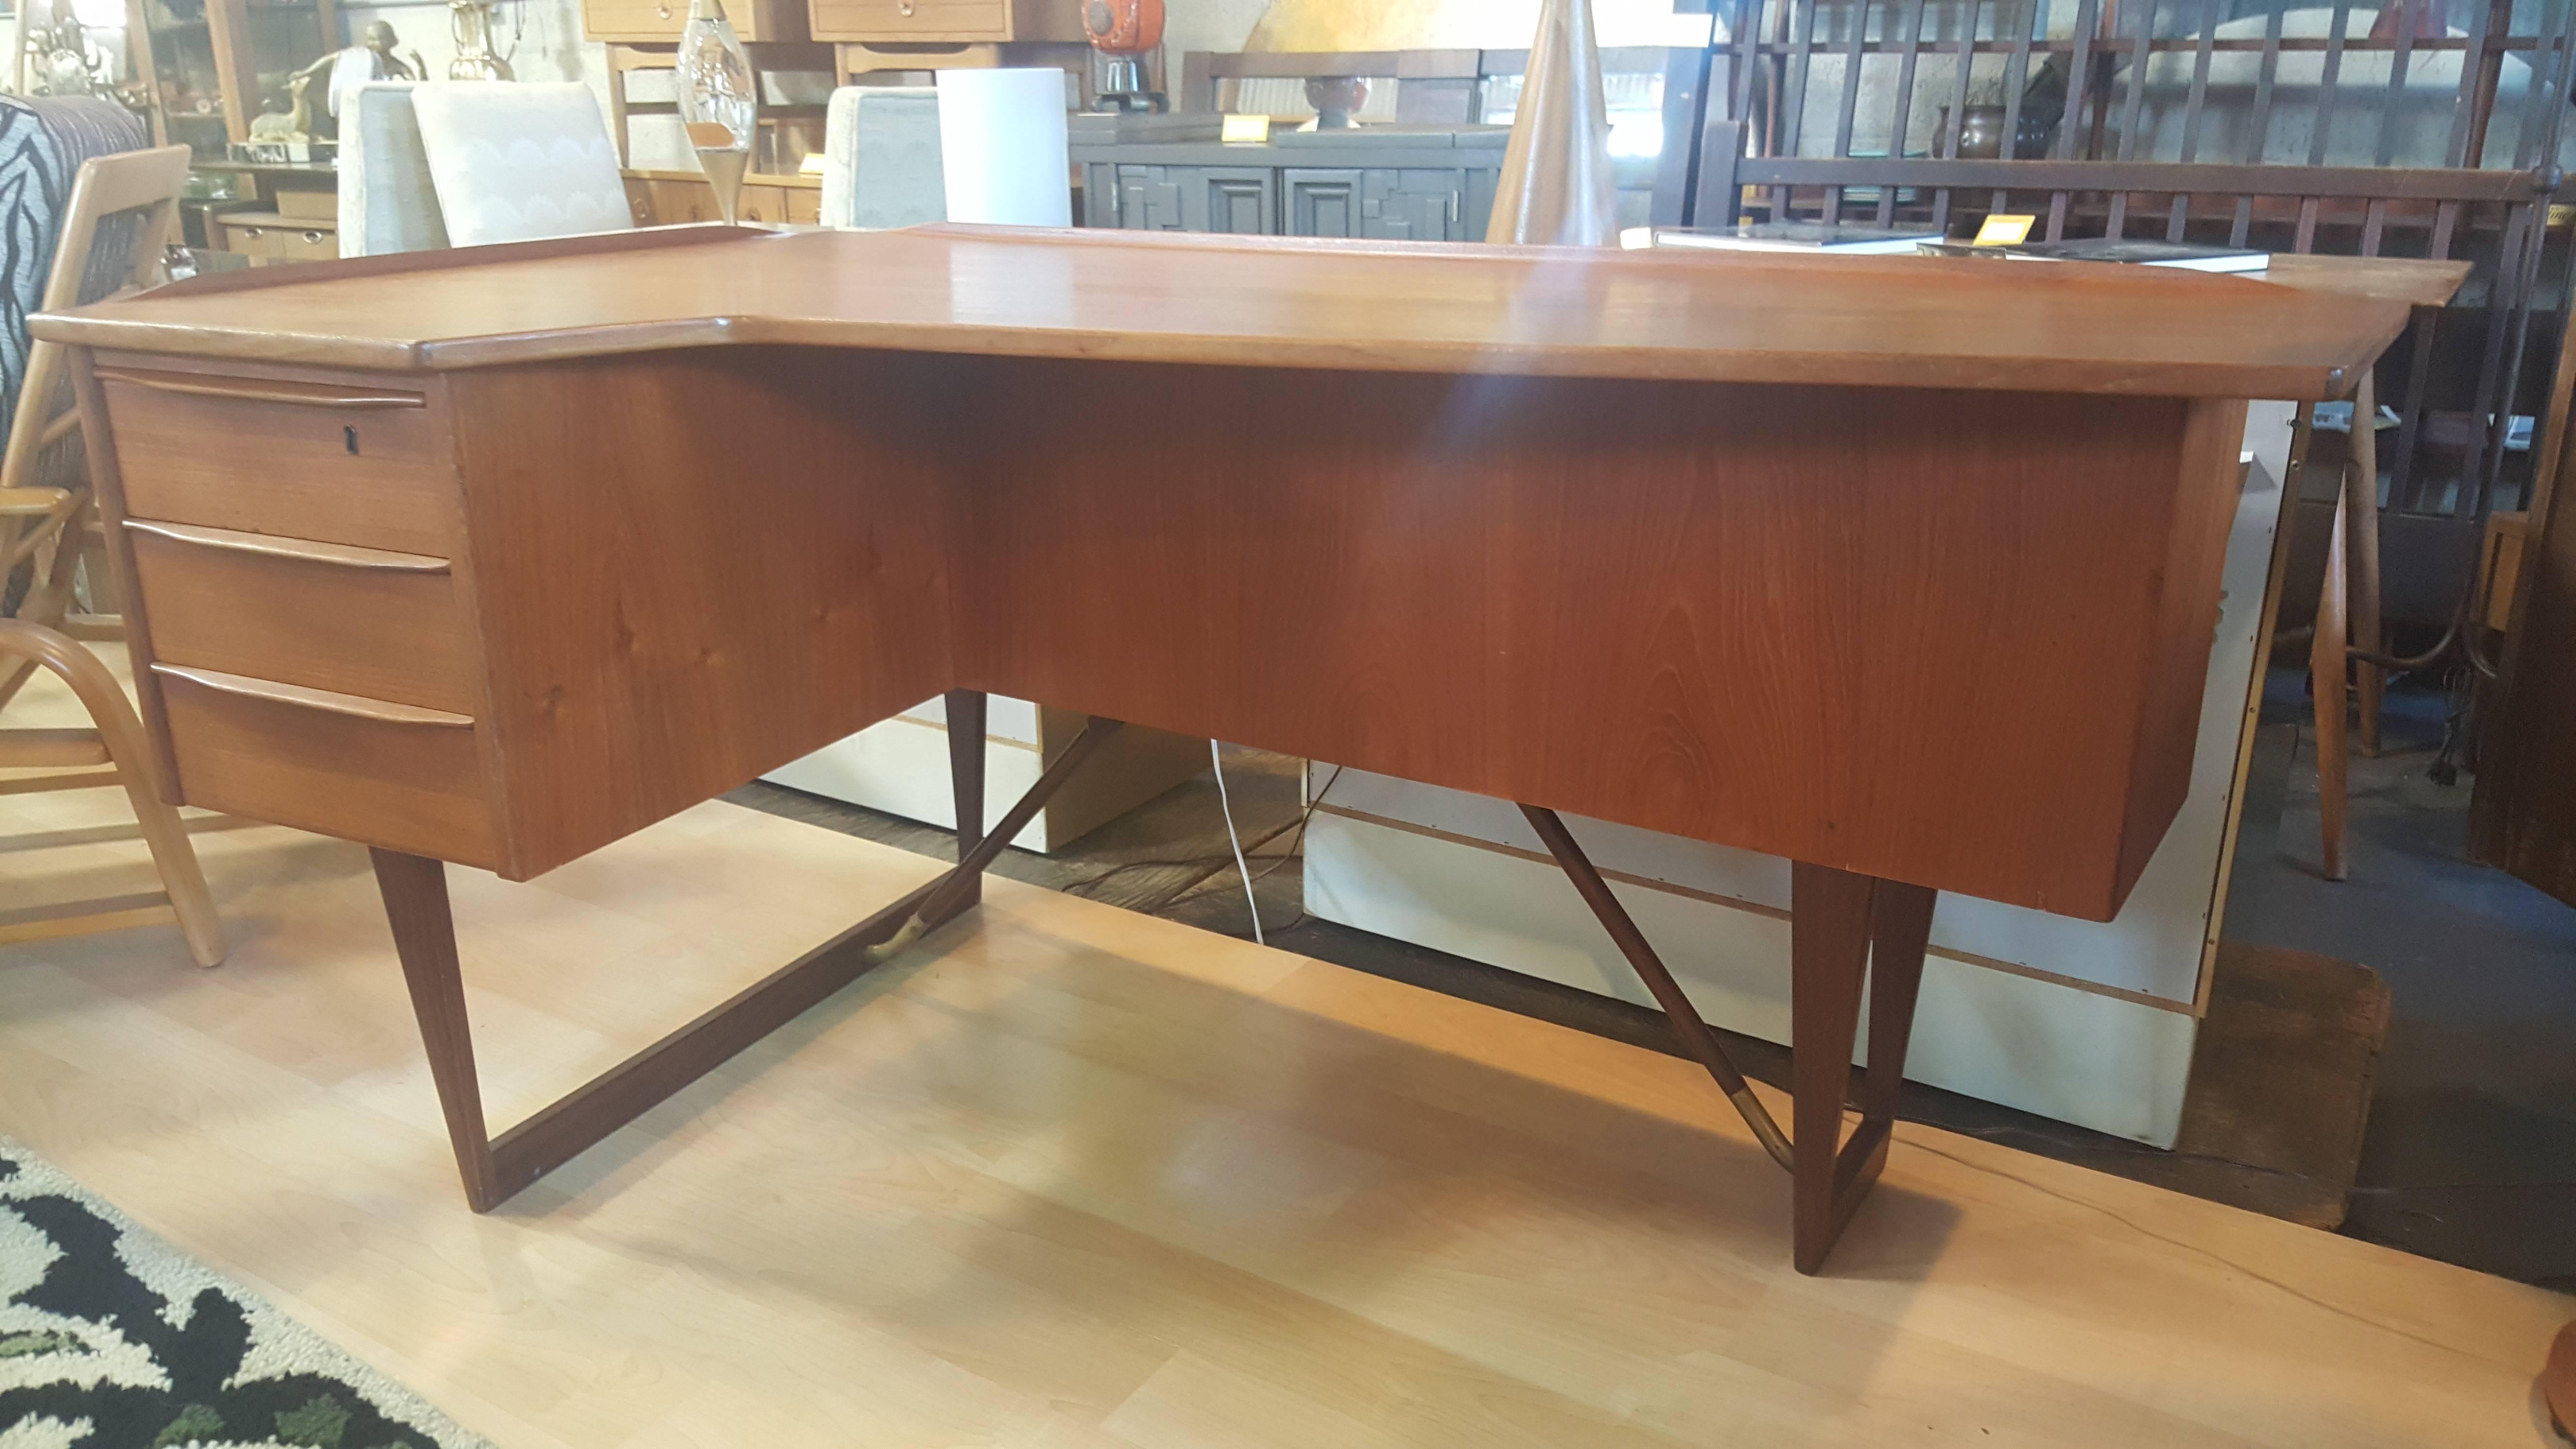 A teak Danish Modern desk designed by Peter Lovig Neilsen, Denmark, 1950s. Boomerang-shaped desk top with molded edges. Reverse side features a locking mirrored bar and bookshelf. Notice turned teak leg supports with brass fittings. Key included.